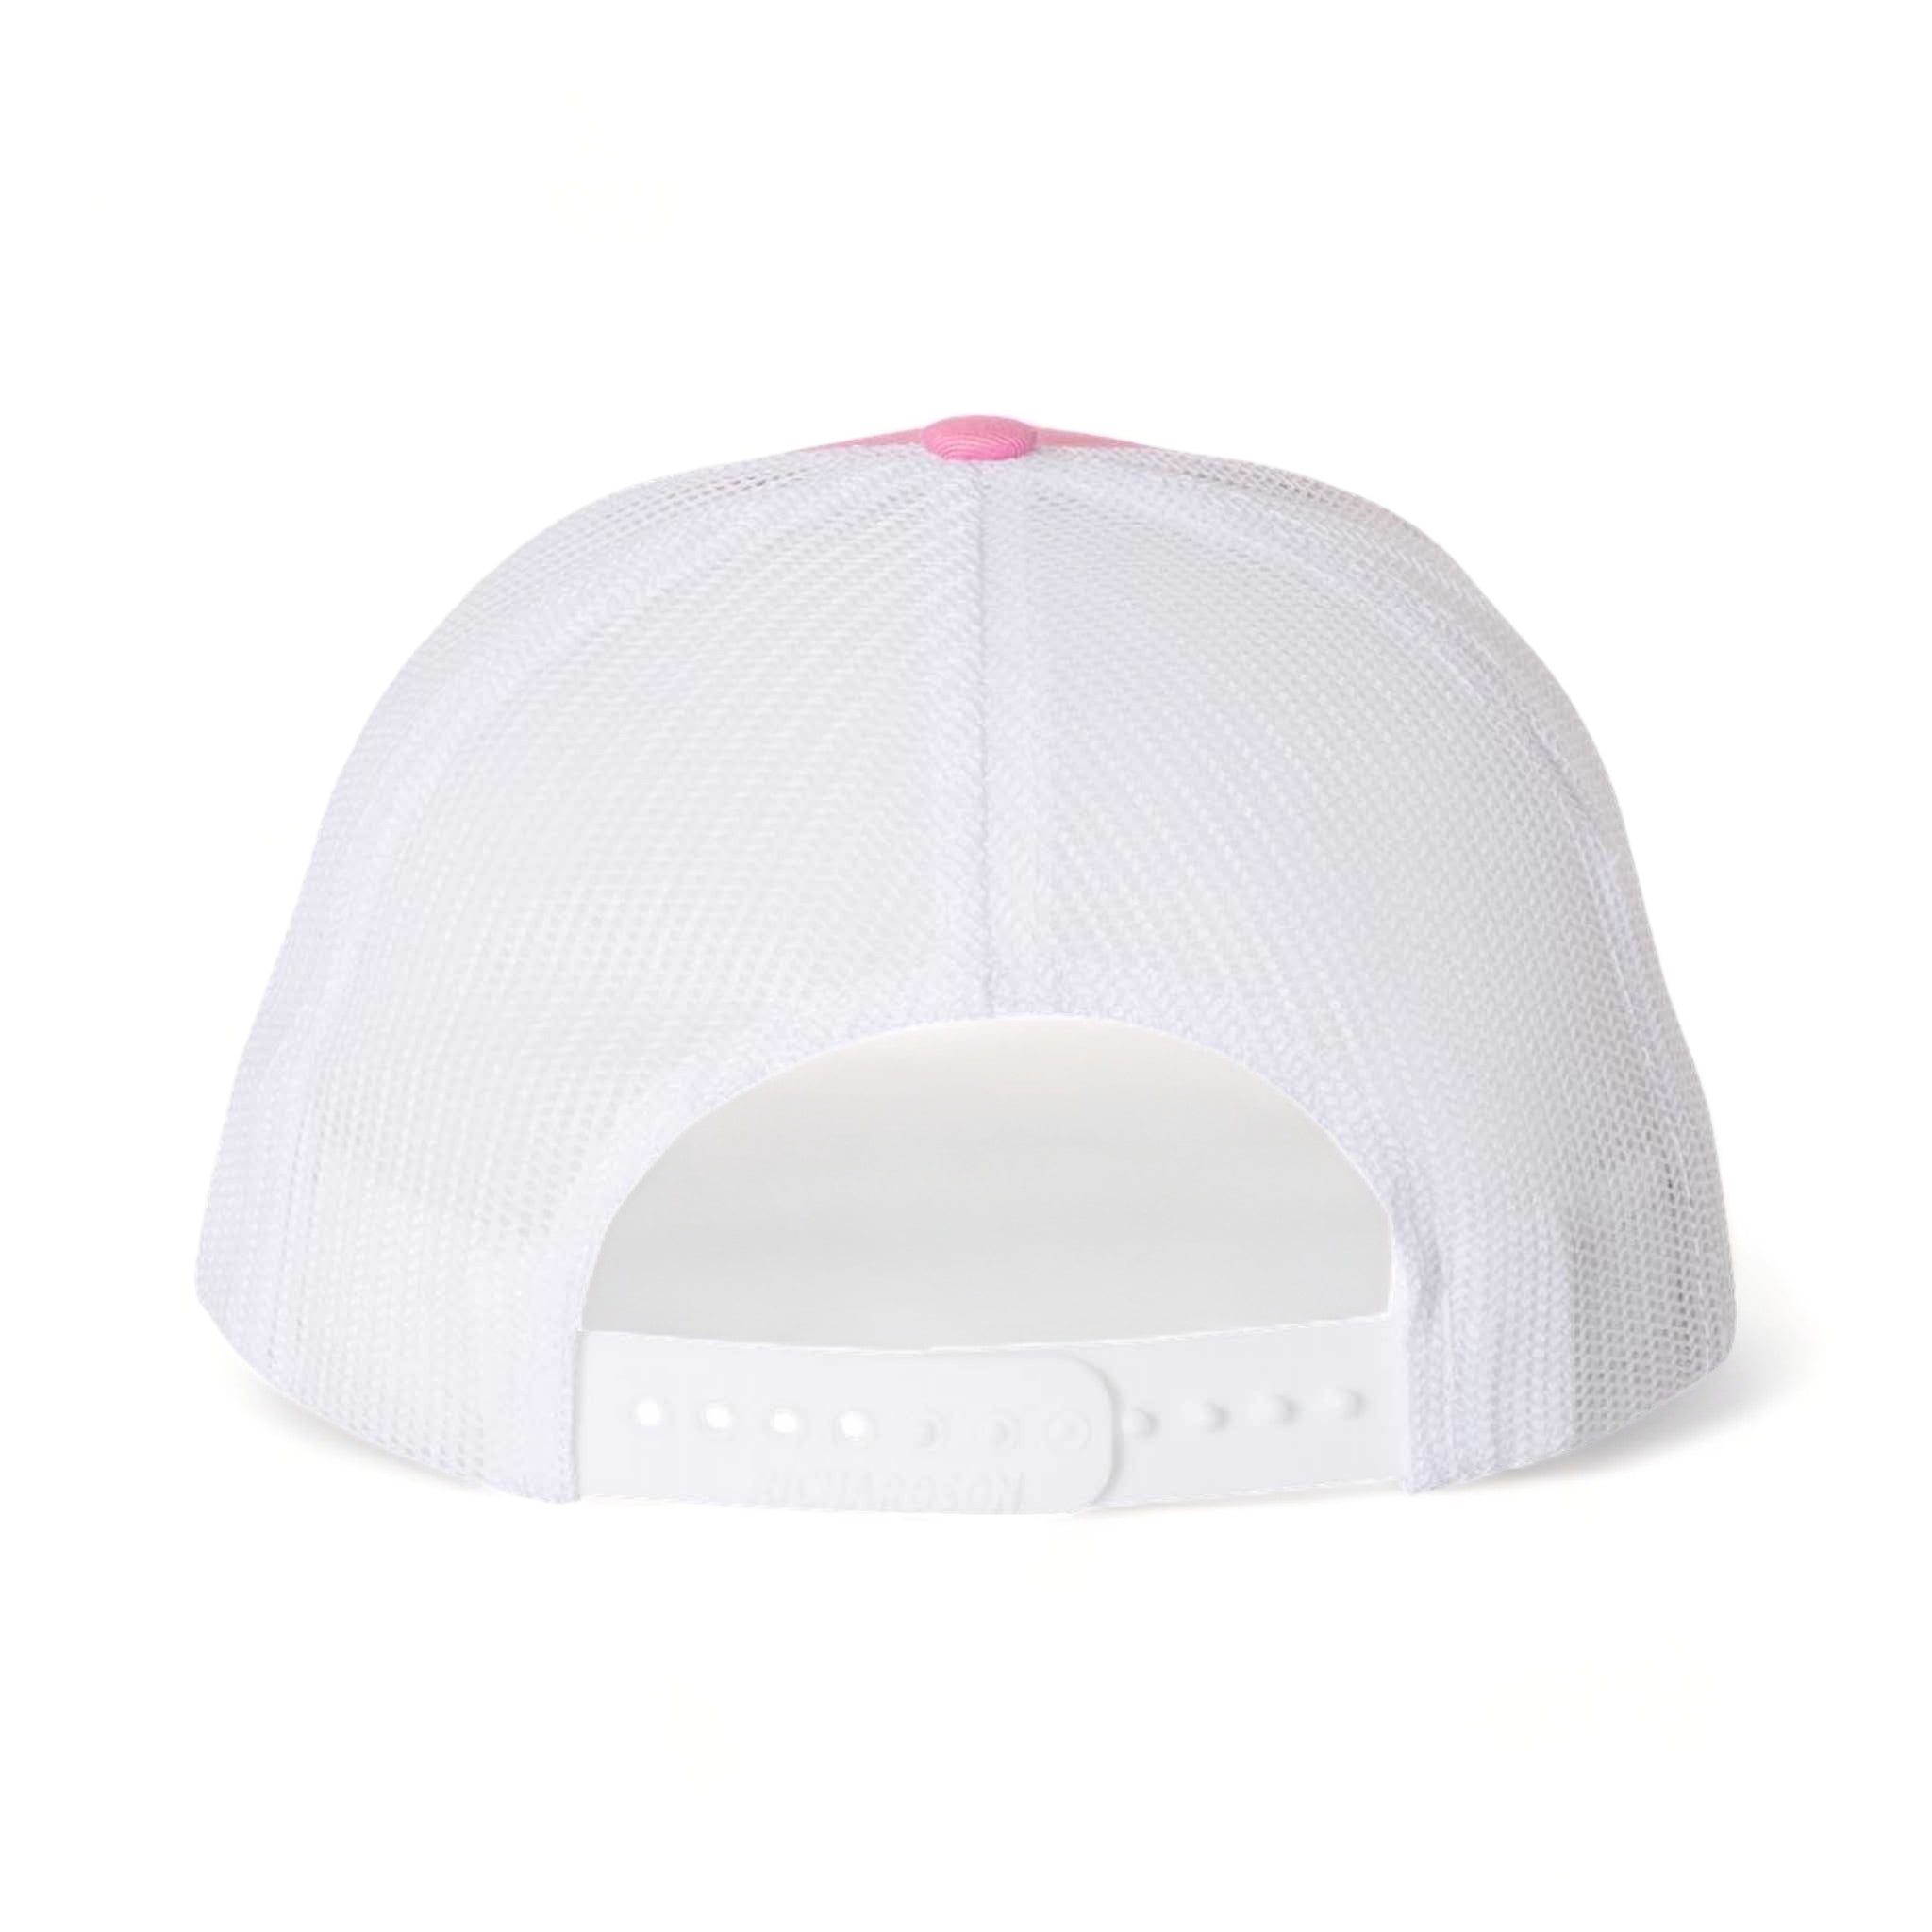 Back view of Richardson 112 custom hat in hot pink and white